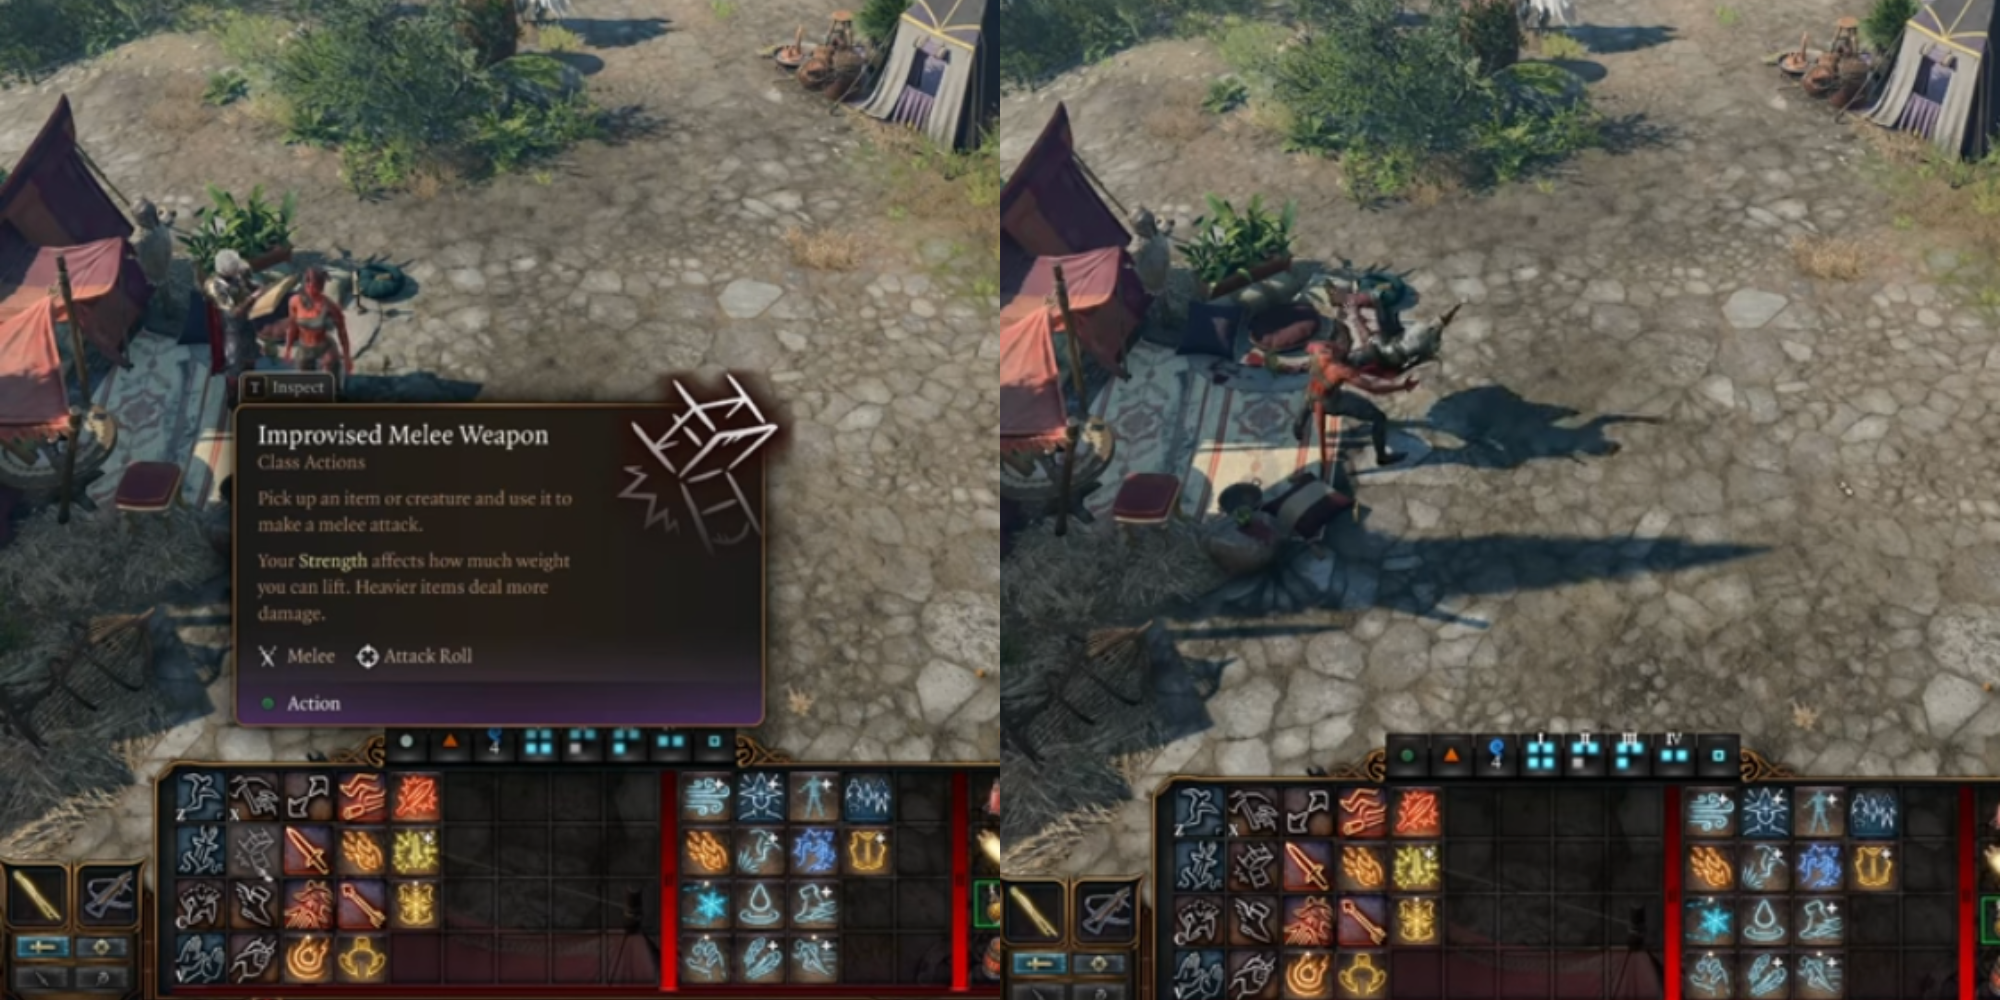 Baldur's Gate 3 Player Discovers Hilarious Way To Break The Deal With Raphael